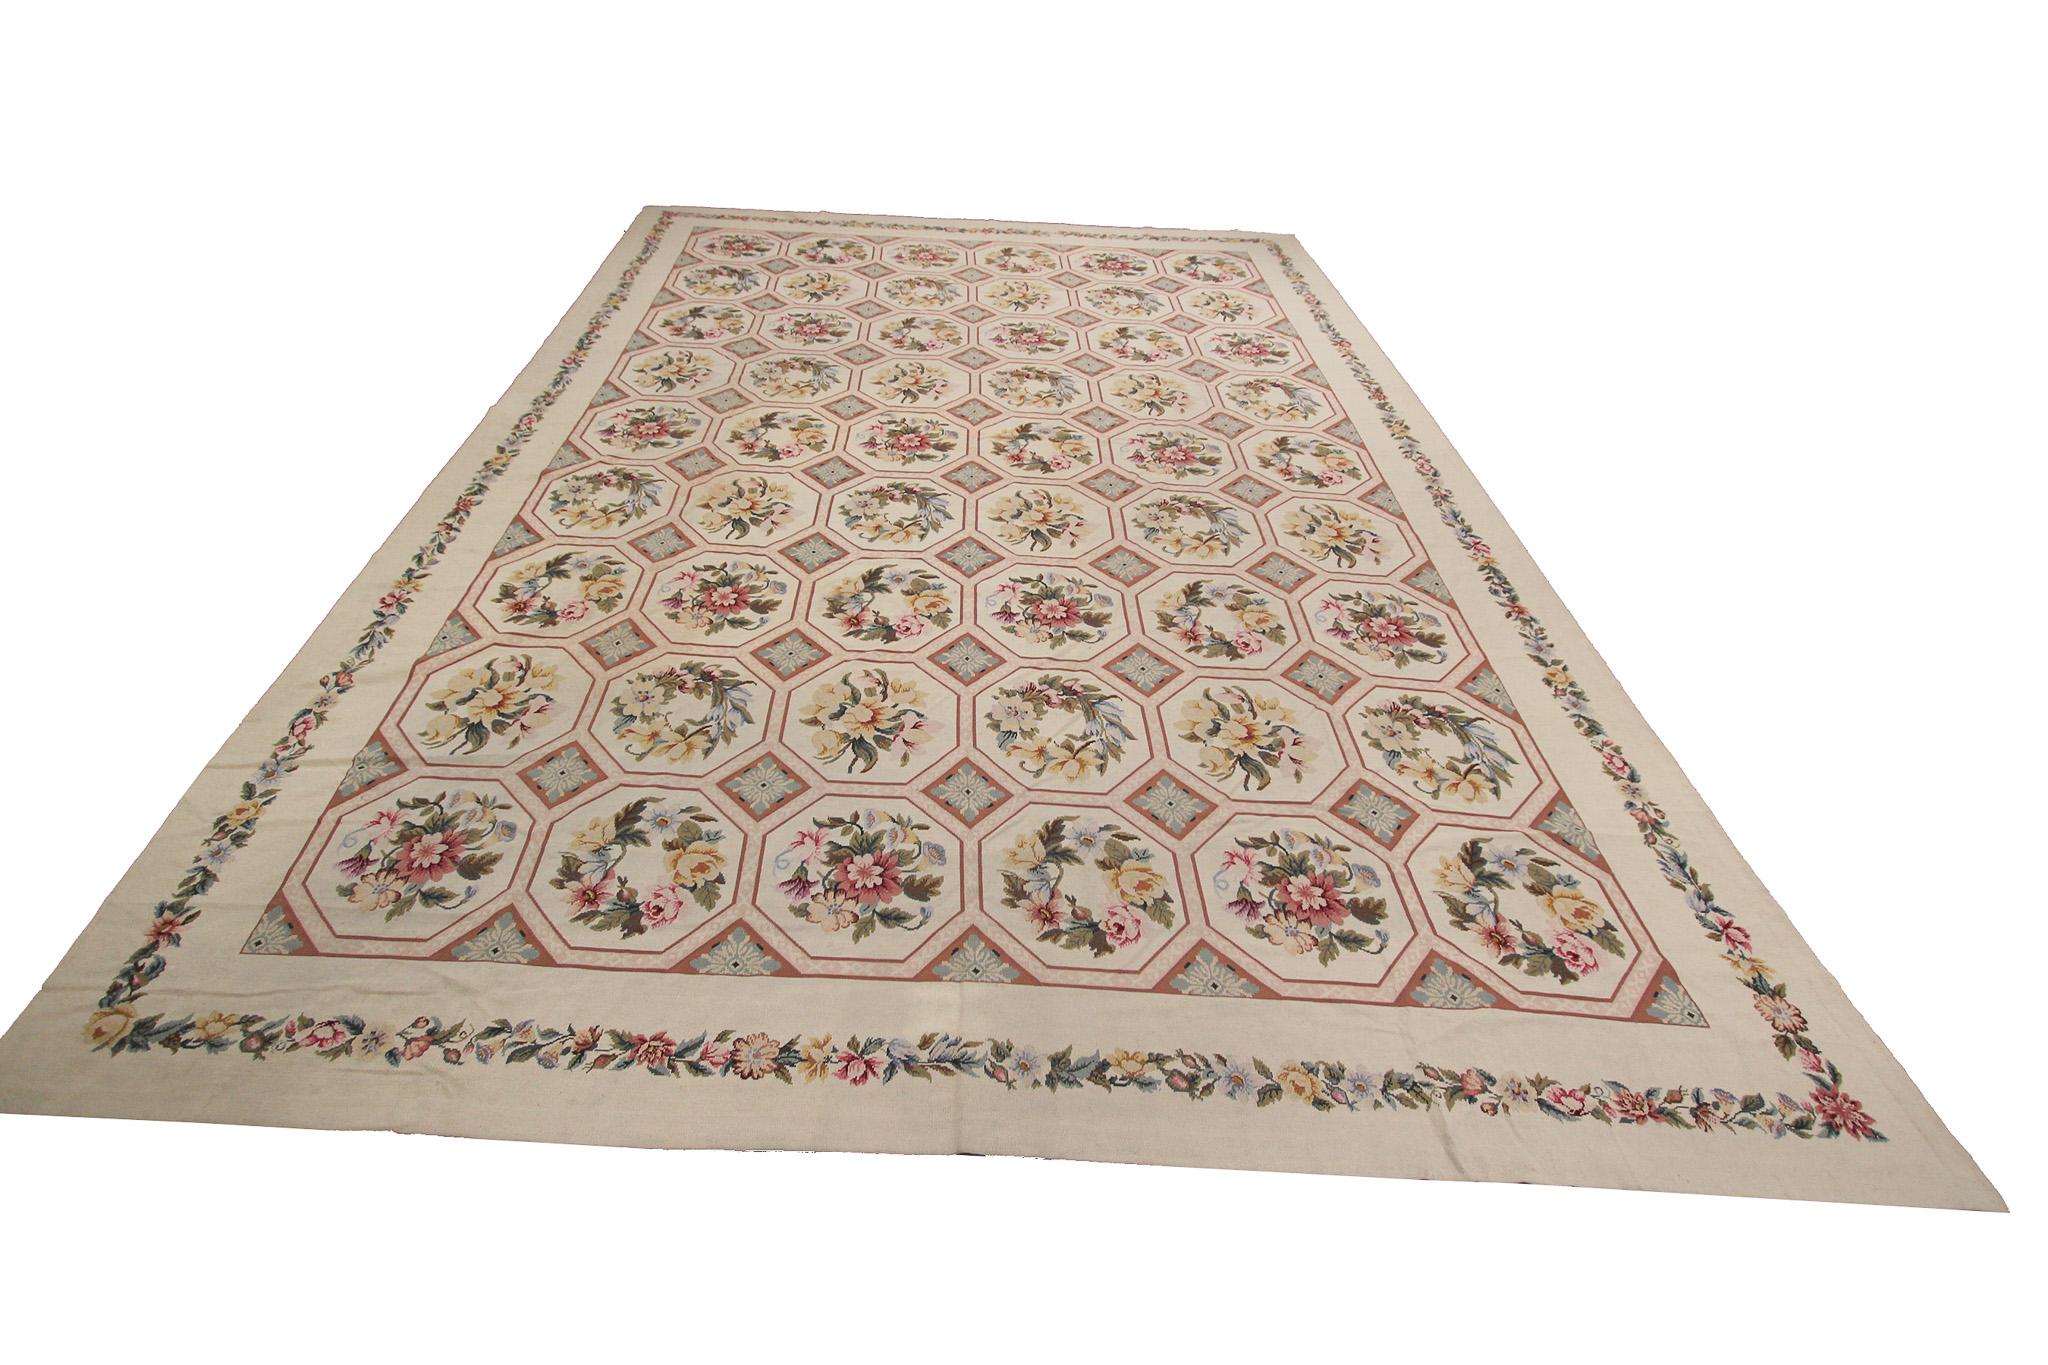 Hand-Woven Vintage European Flatwoven Rug Handwoven Rug Geometric Overall Ivory Beige For Sale